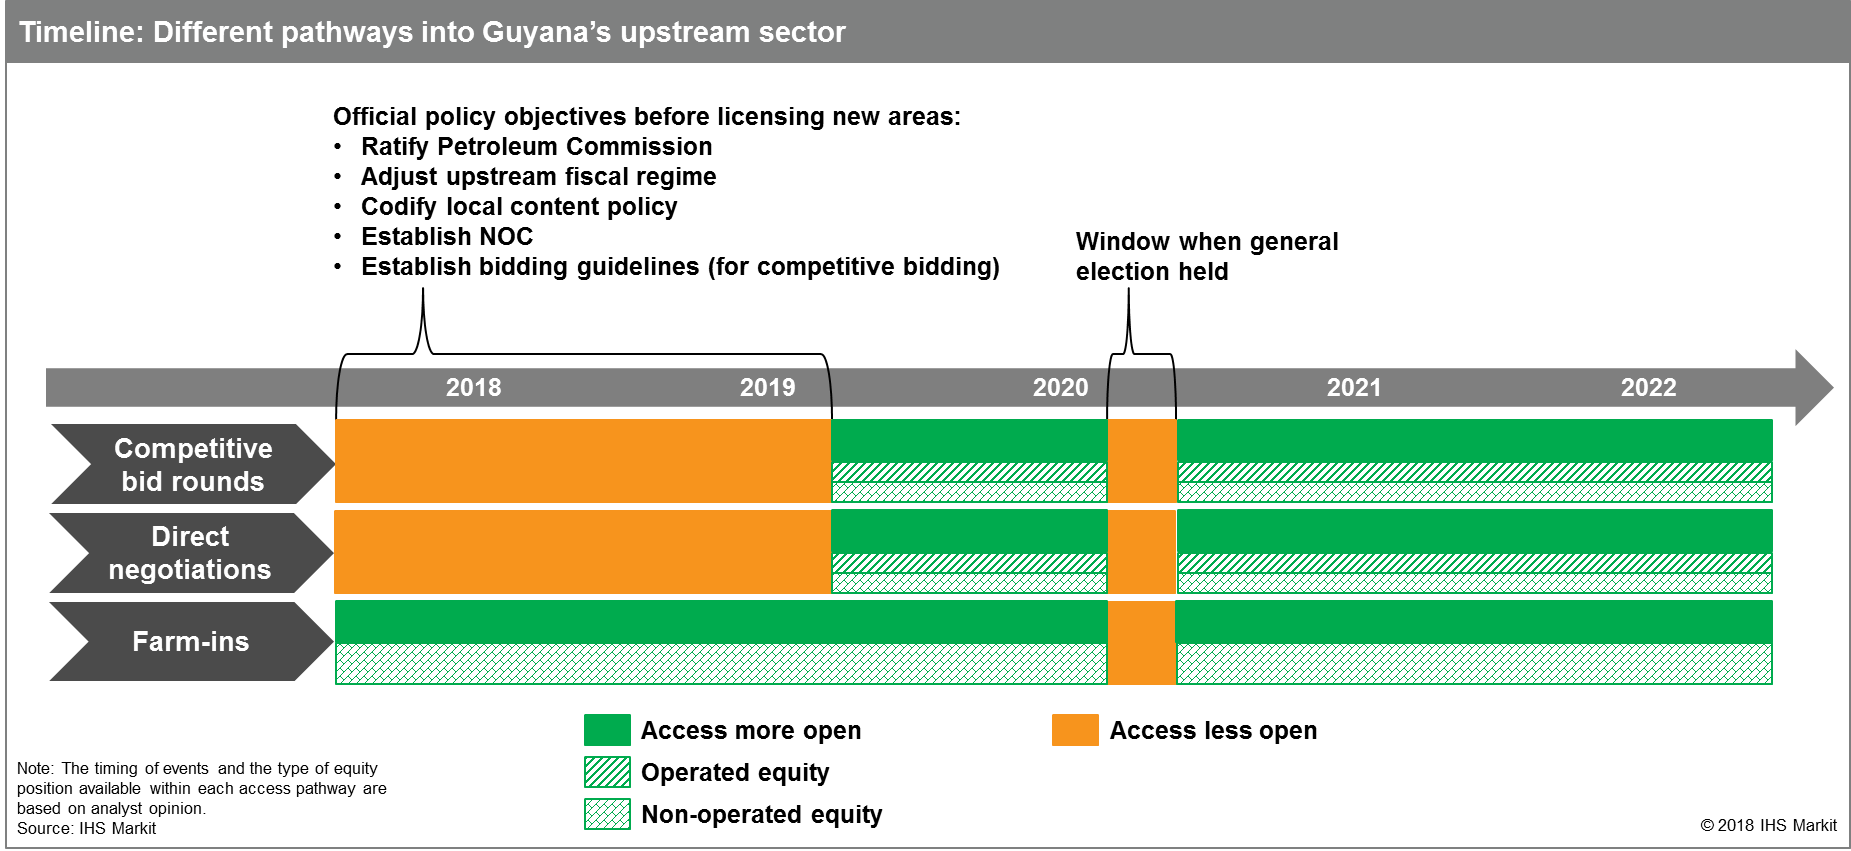 Timeline- Different pathways into Guyana's upstream sector